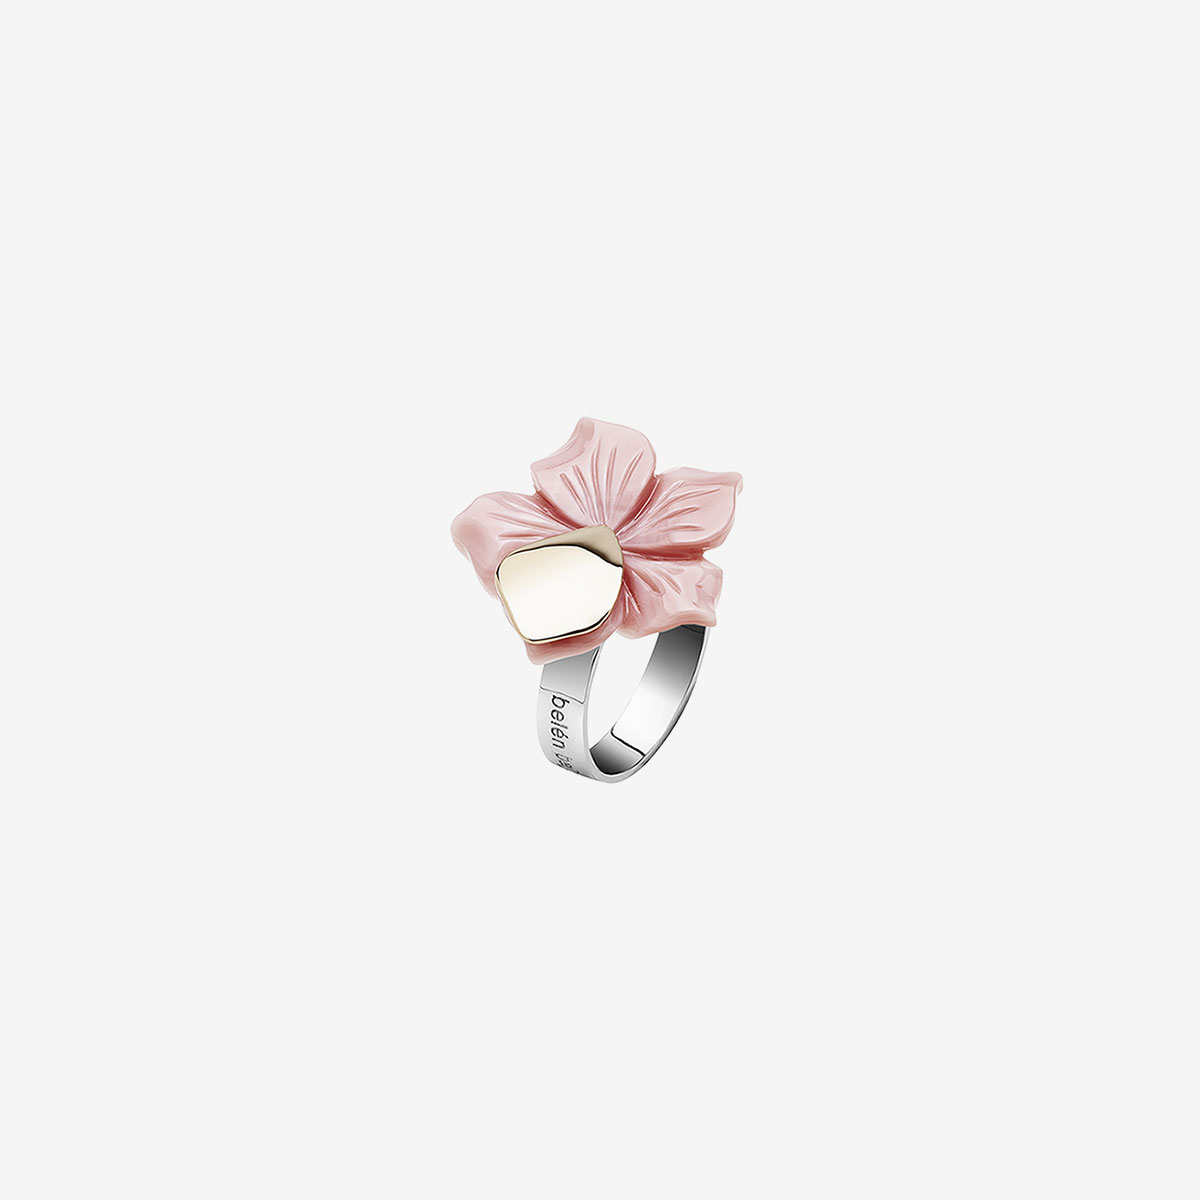 Aine handmade ring in 9k or 18k gold, sterling silver and pink shell designed by Belen Bajo